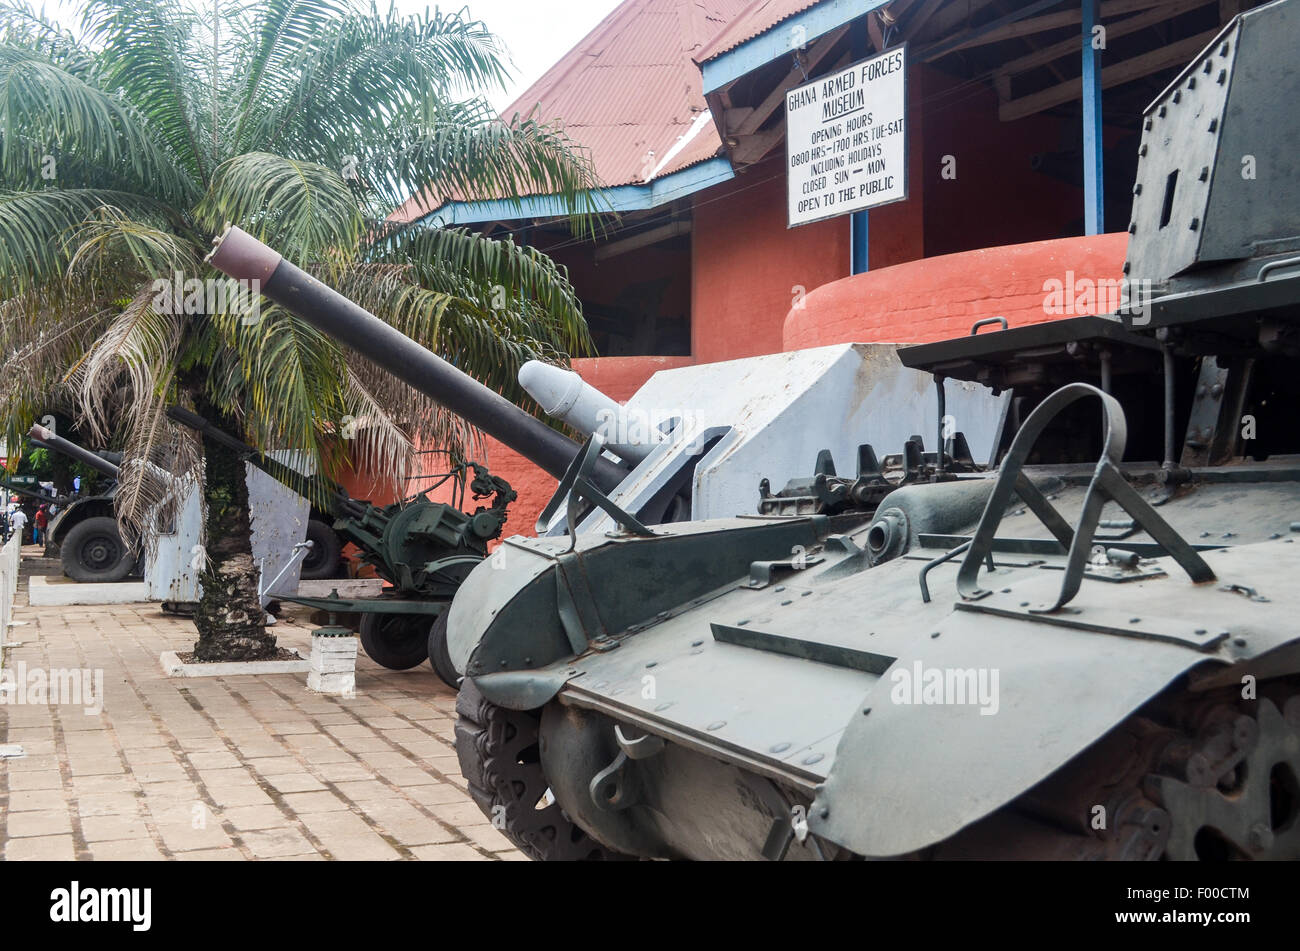 Tank am Eingang des Armed Forces Museum von Kumasi, Ghana Stockfoto